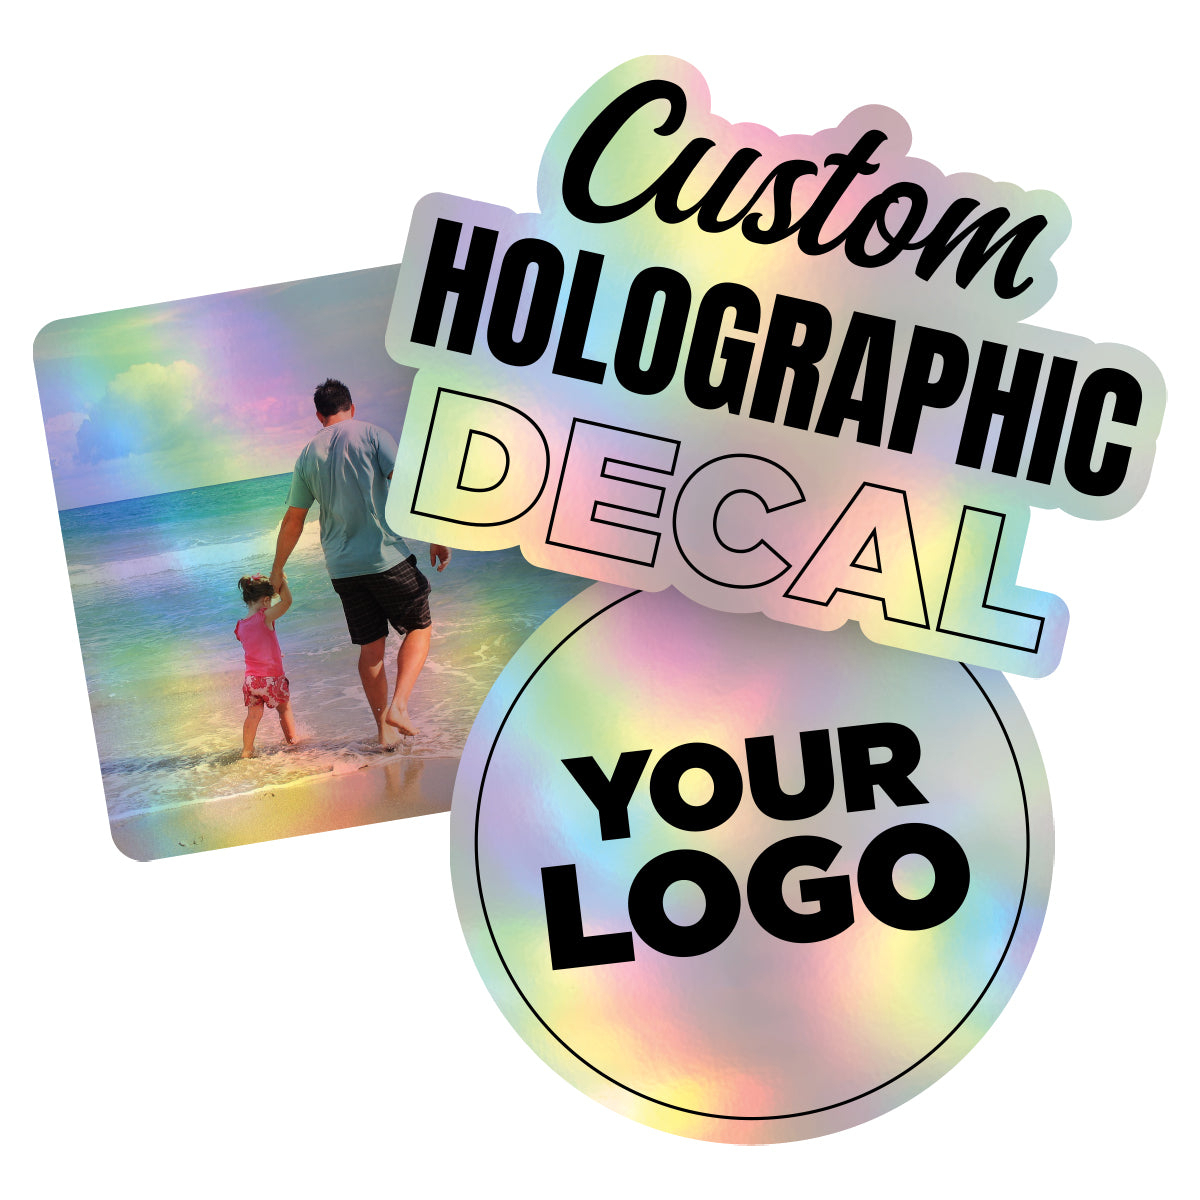 Personalized Holographic Vinyl Sticker Decal Custom Made Any Logo, Image, Text, Or Name Die Cut To Shape - Single, 2 Inch, Die Cut